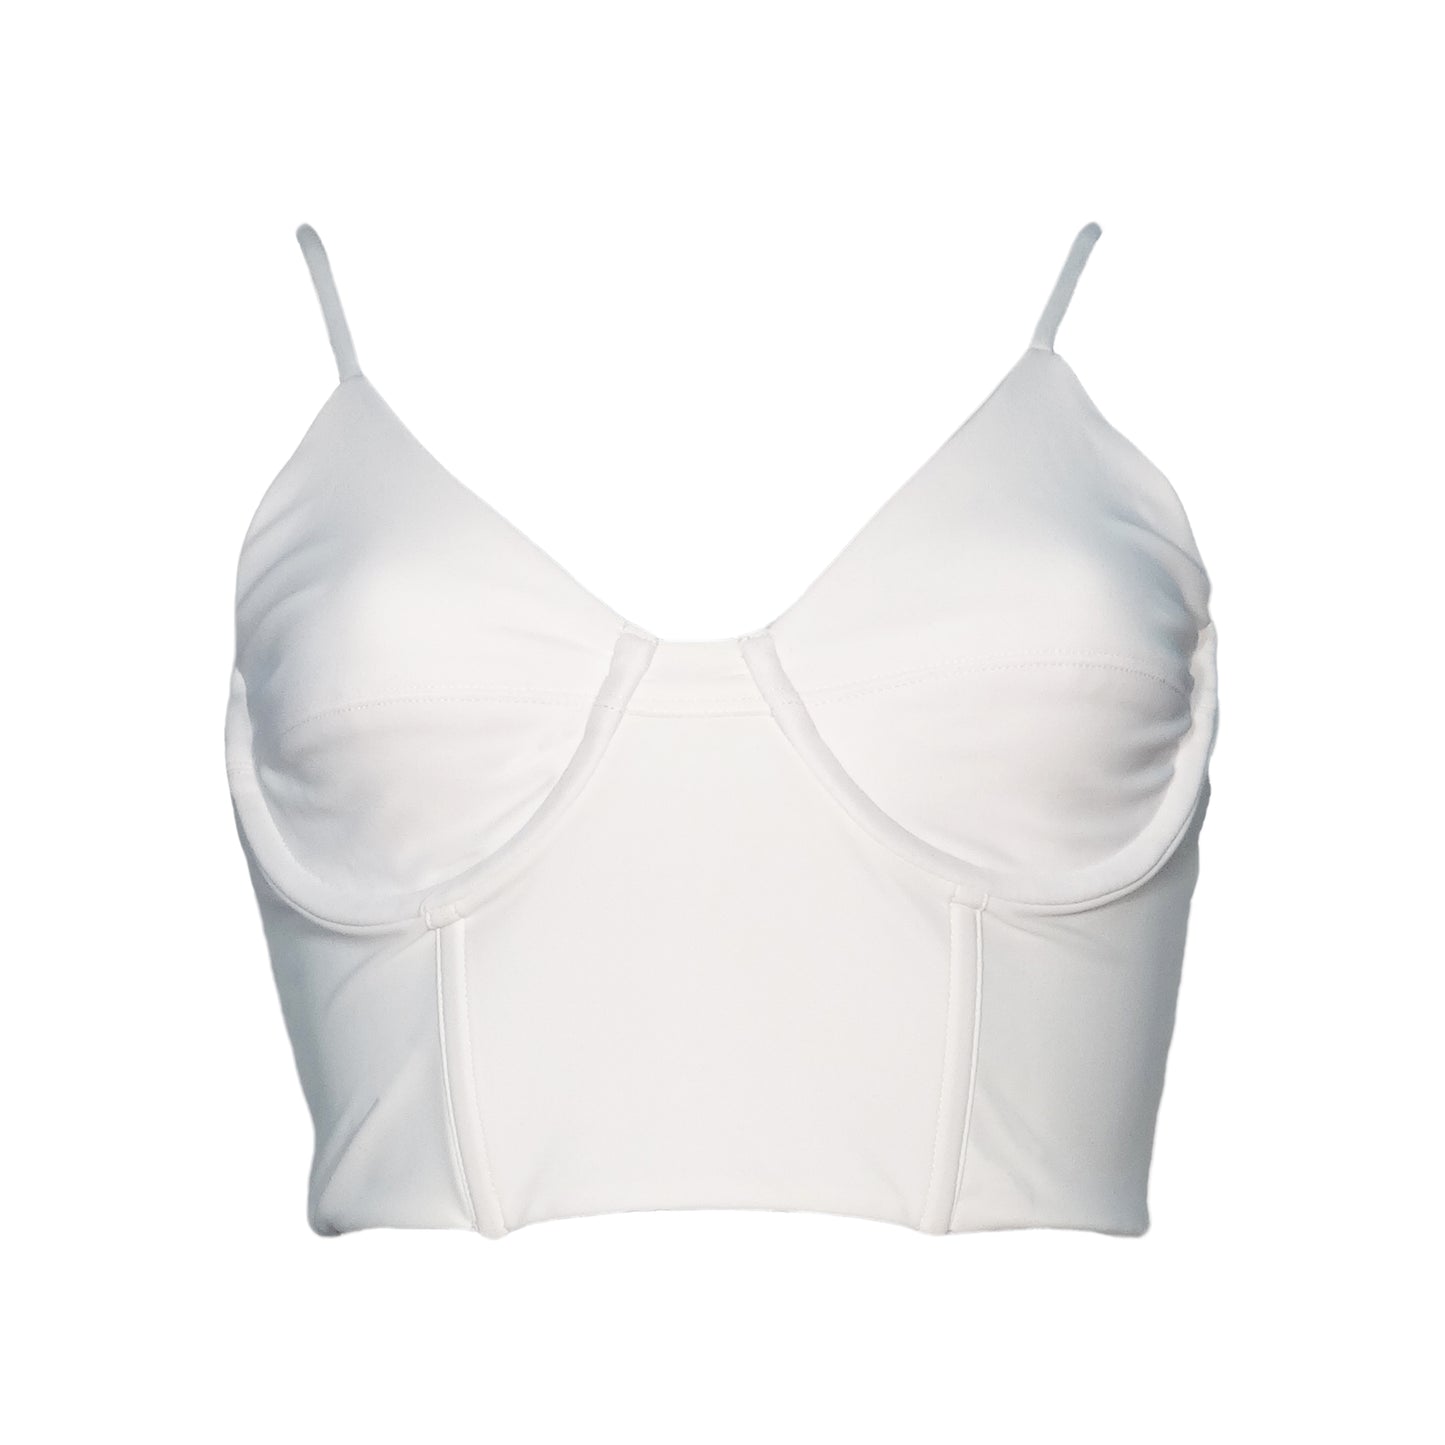 Cloud bustier bikini top with adjustable straps, underwire and princess seam boning. 